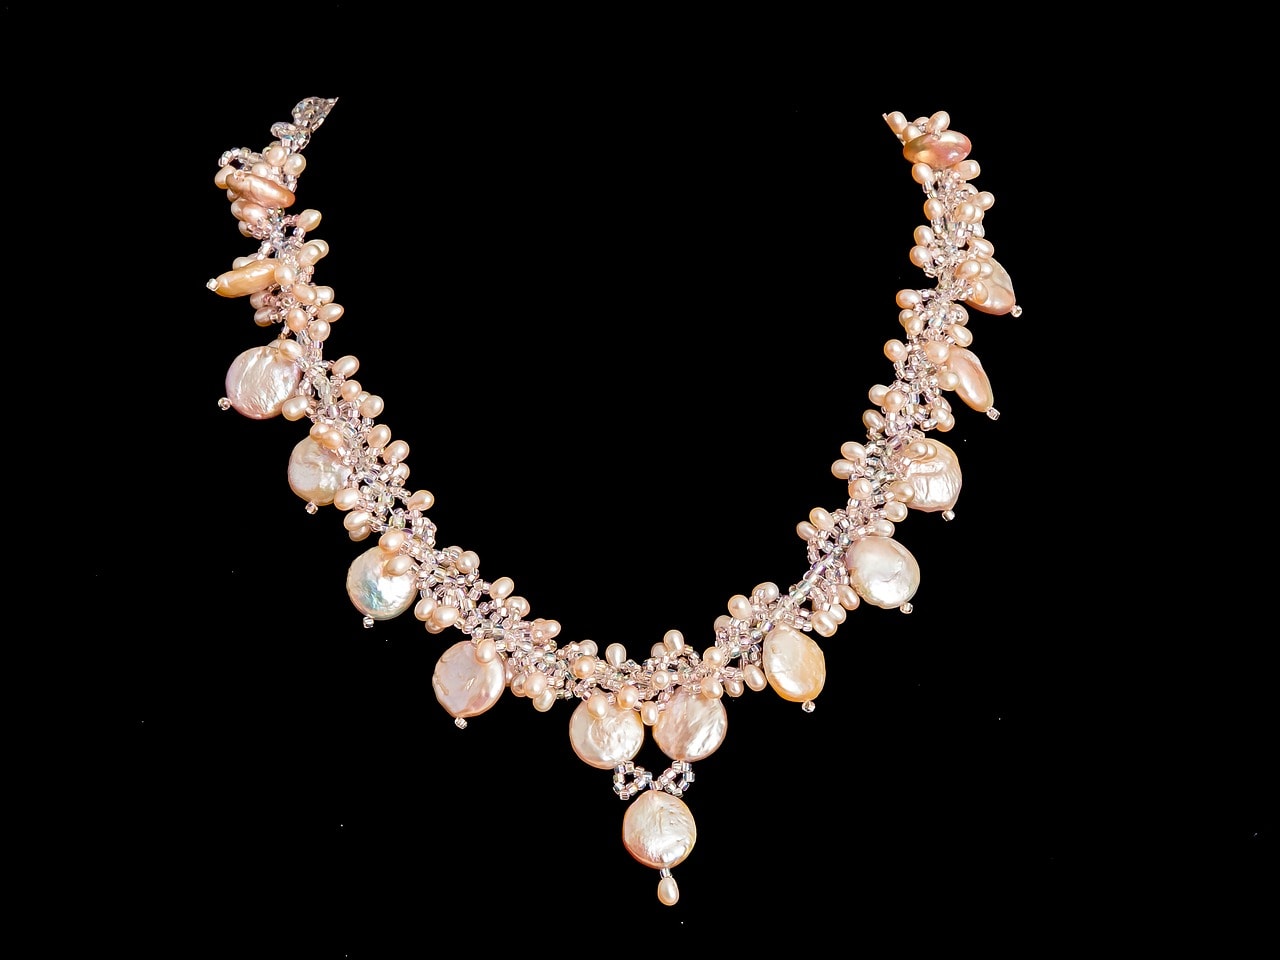 Golden colored pearl necklace